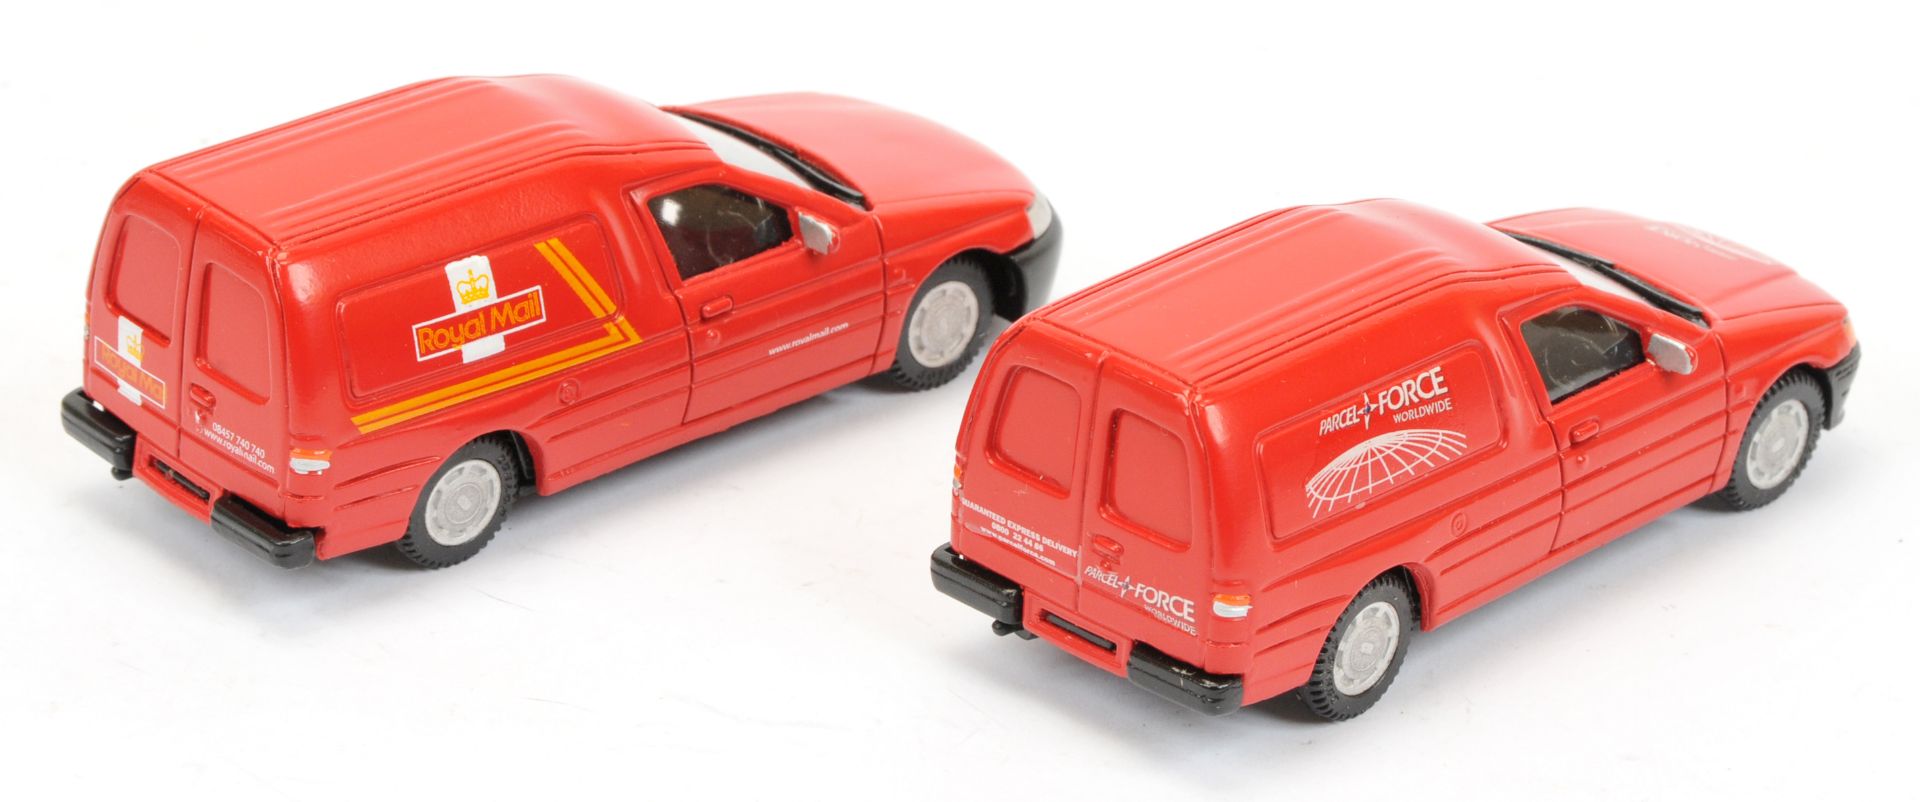 Promod Resin/White Metal Ford Escort  Van A Pair (1) "Royal mail" - Red and (2) "Parcel Force" - Re - Image 2 of 2